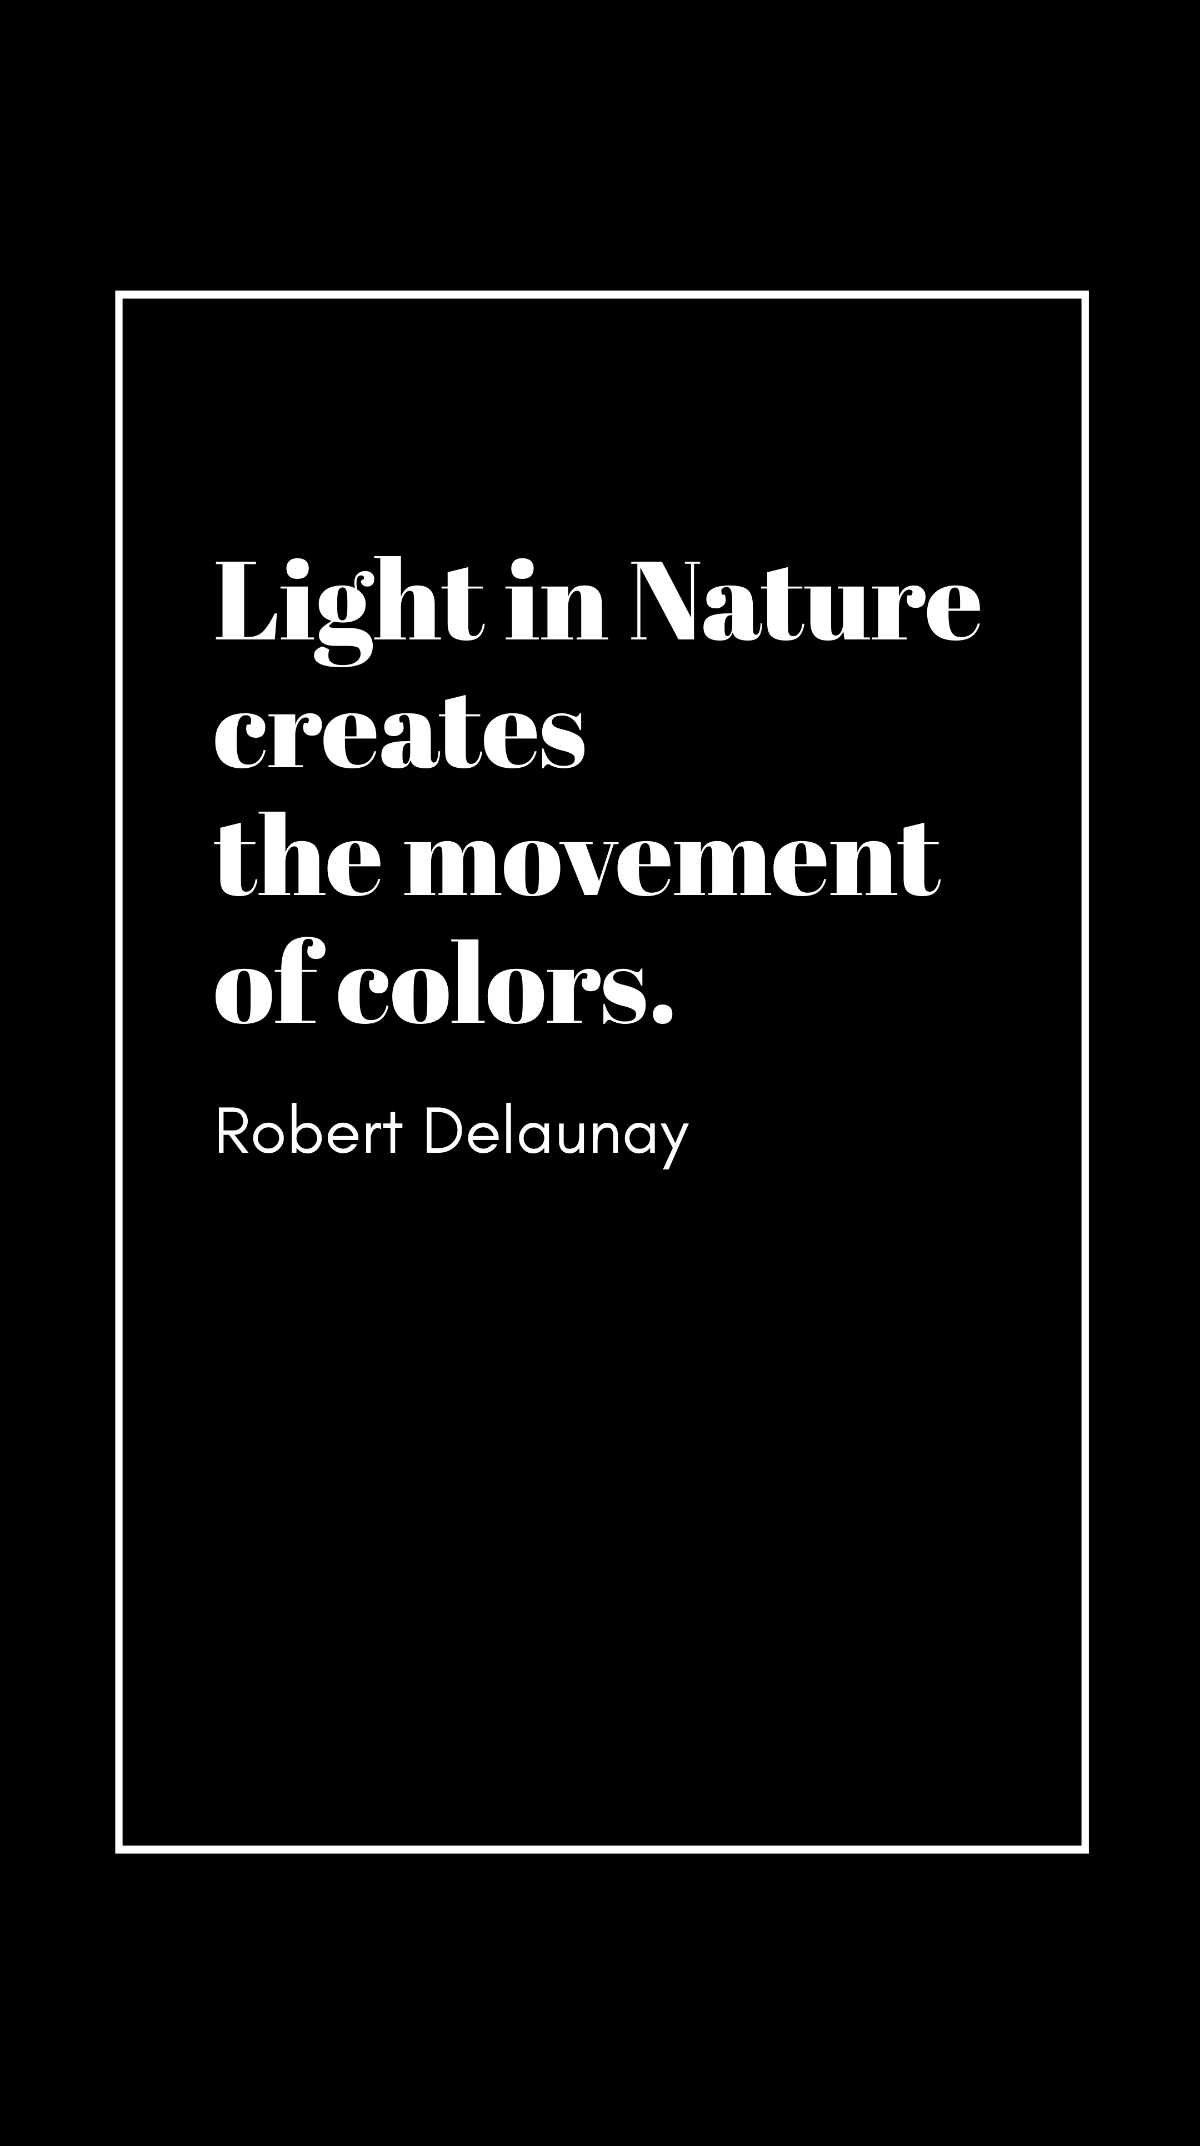 Robert Delaunay - Light in Nature creates the movement of colors.